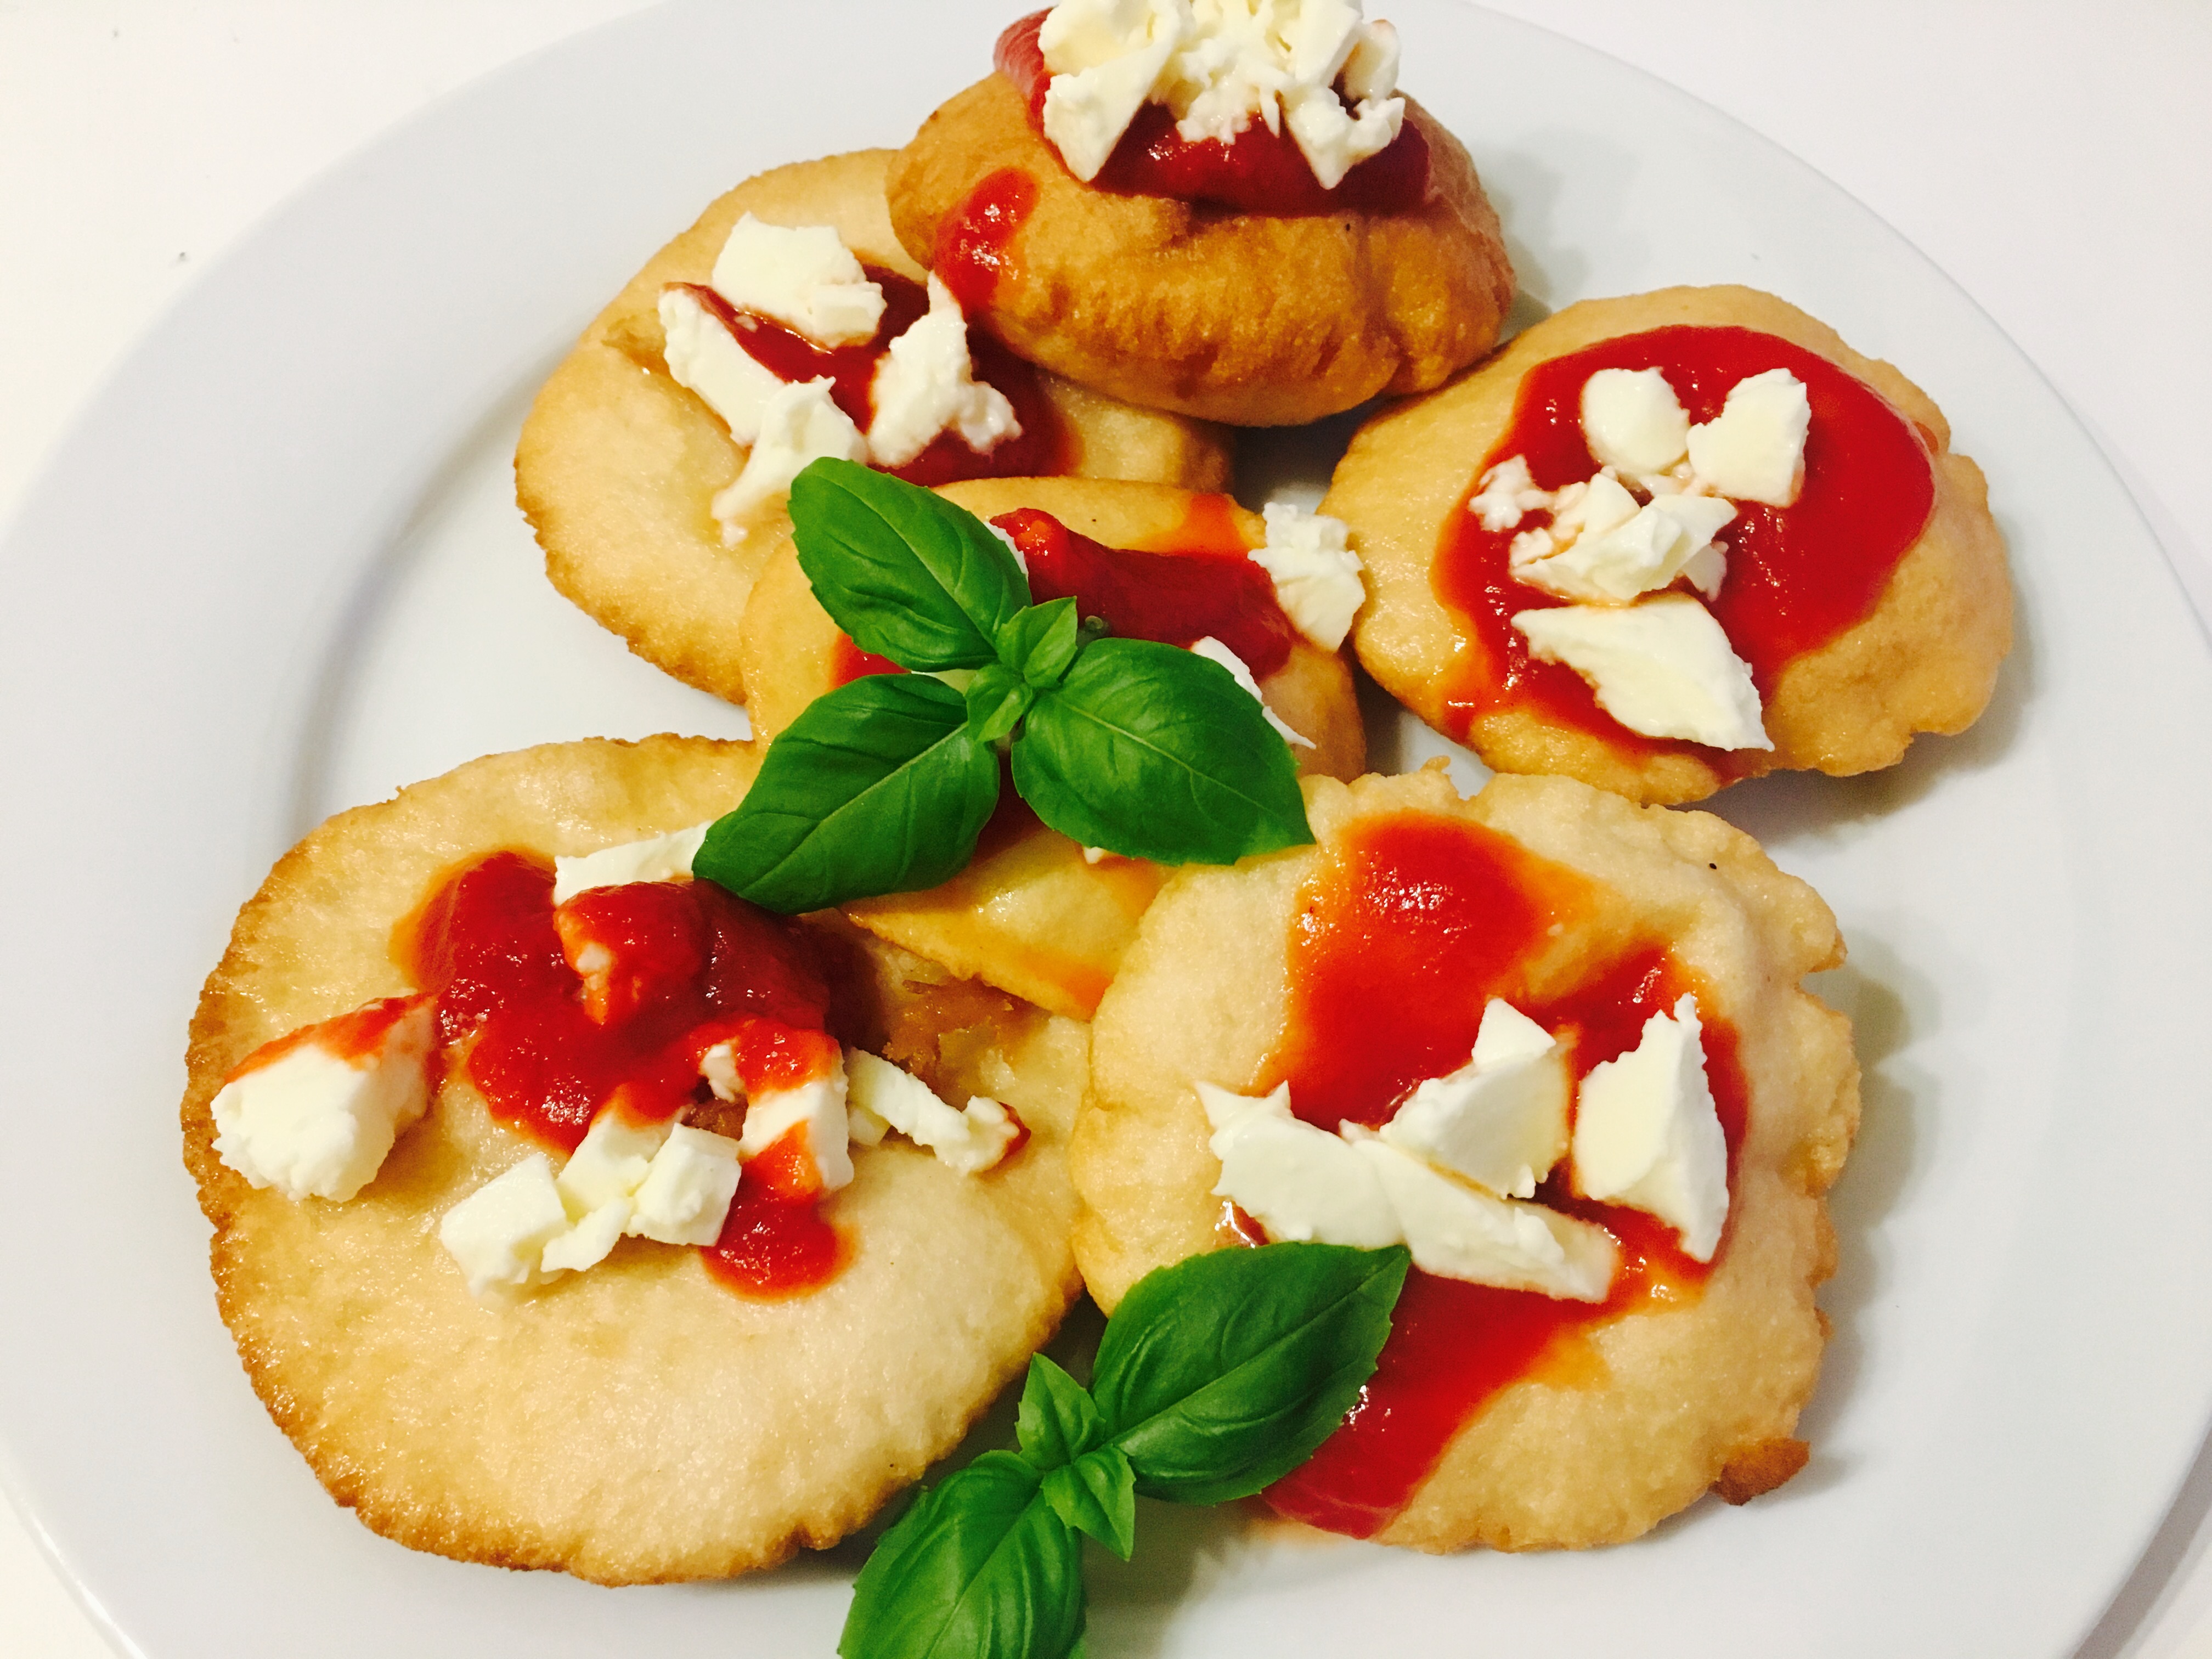 Fried pizzette! - Recipes on the go